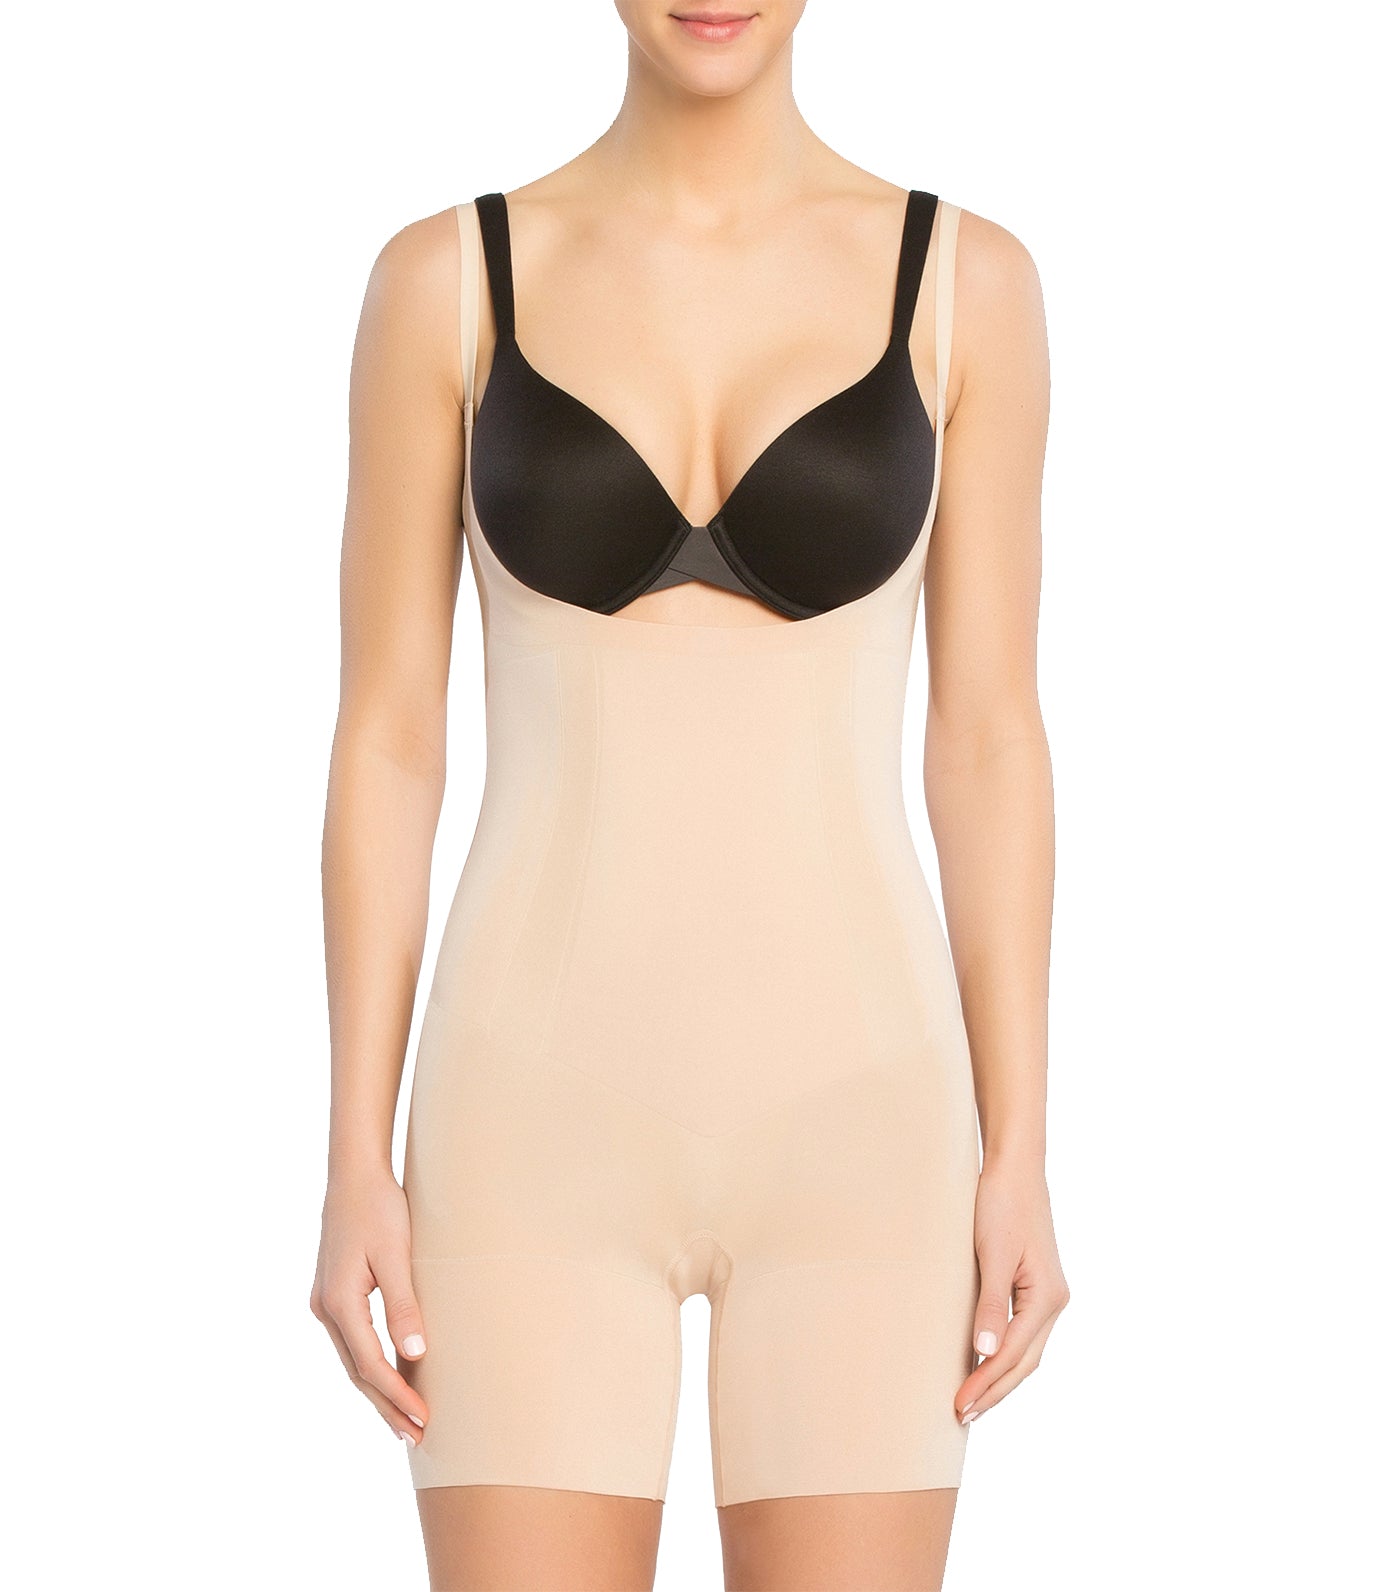 spanx oncore open-bust mid-thigh bodysuit soft nude